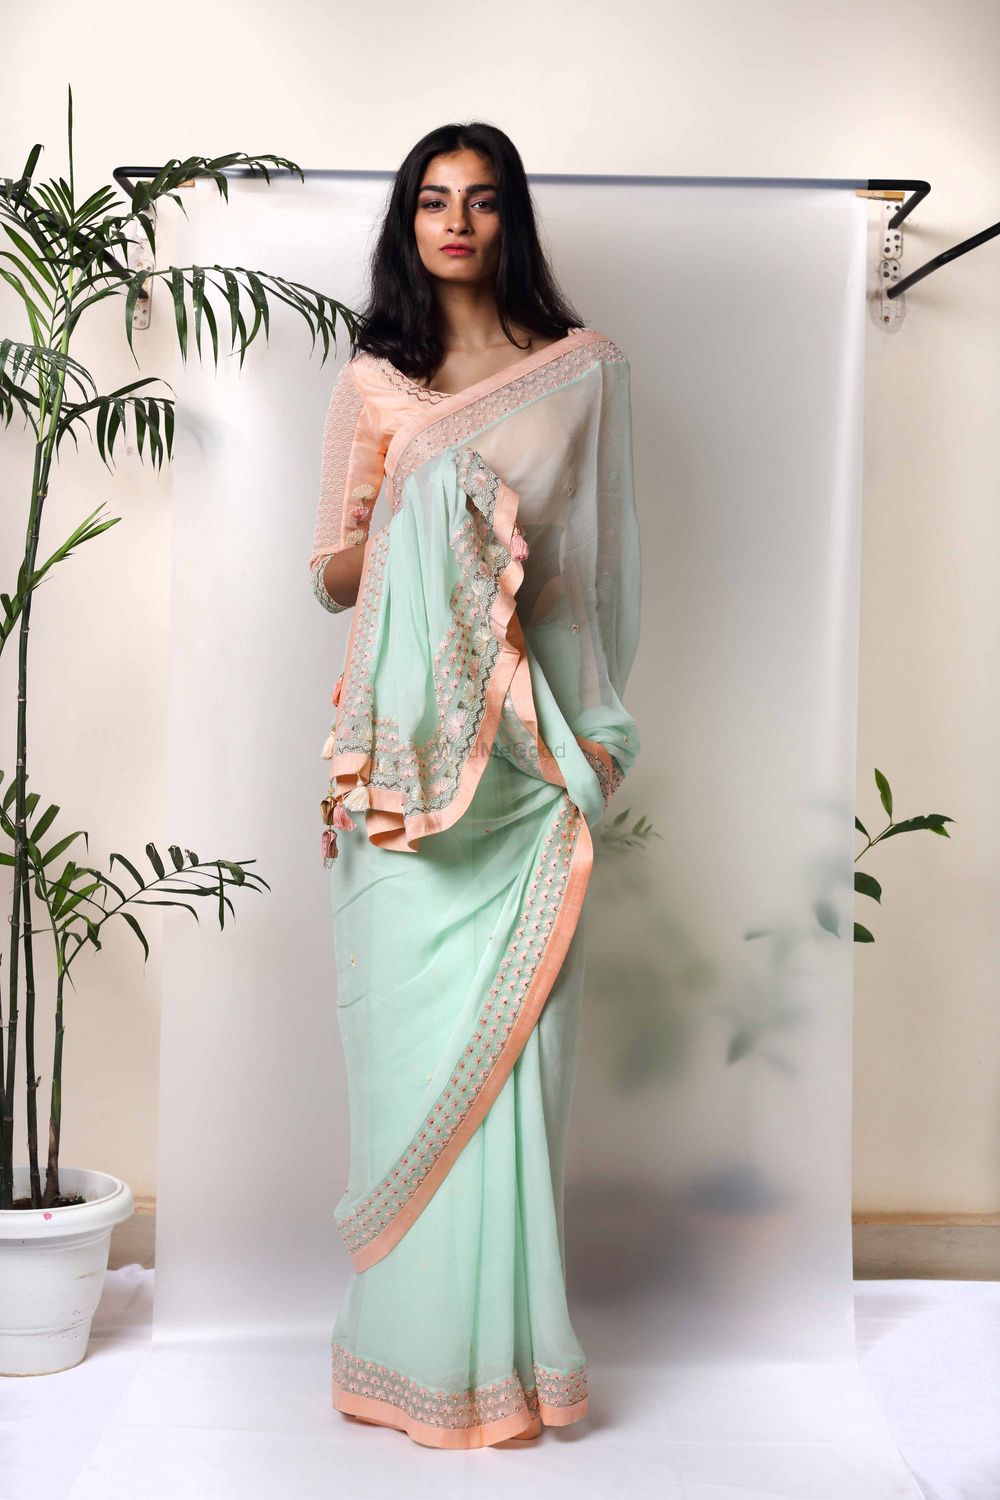 Photo of peach and pale blue saree